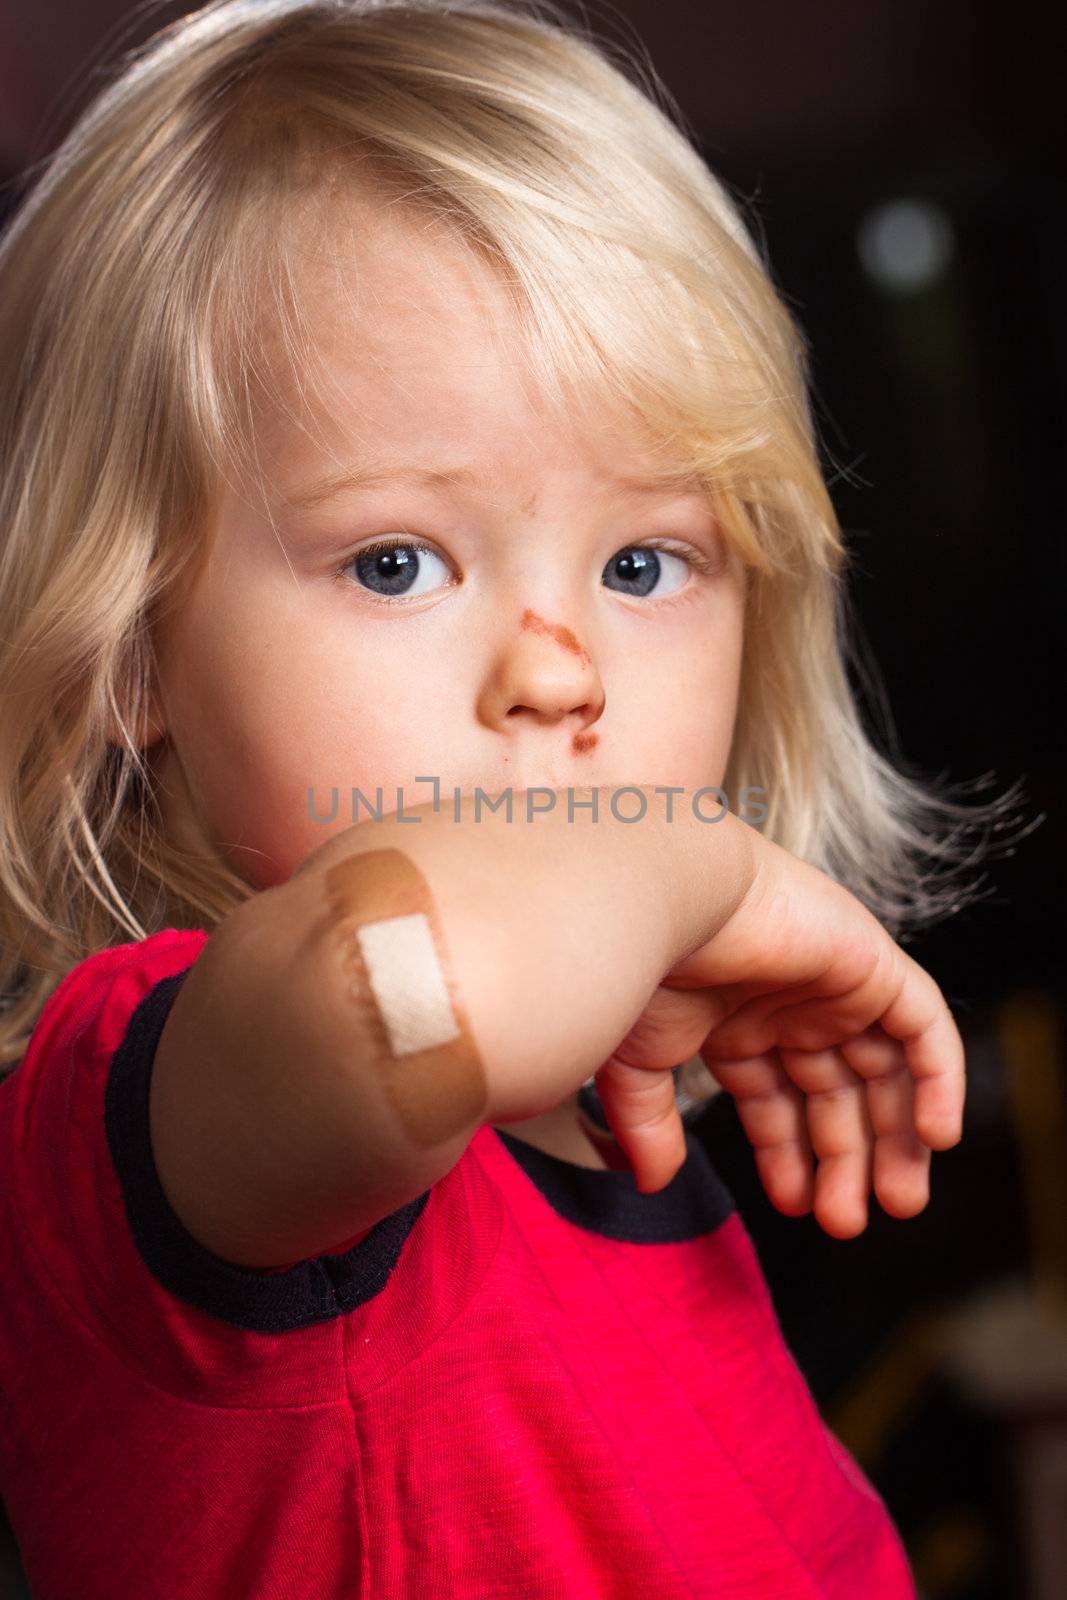 Injured boy with band aid on by Jaykayl